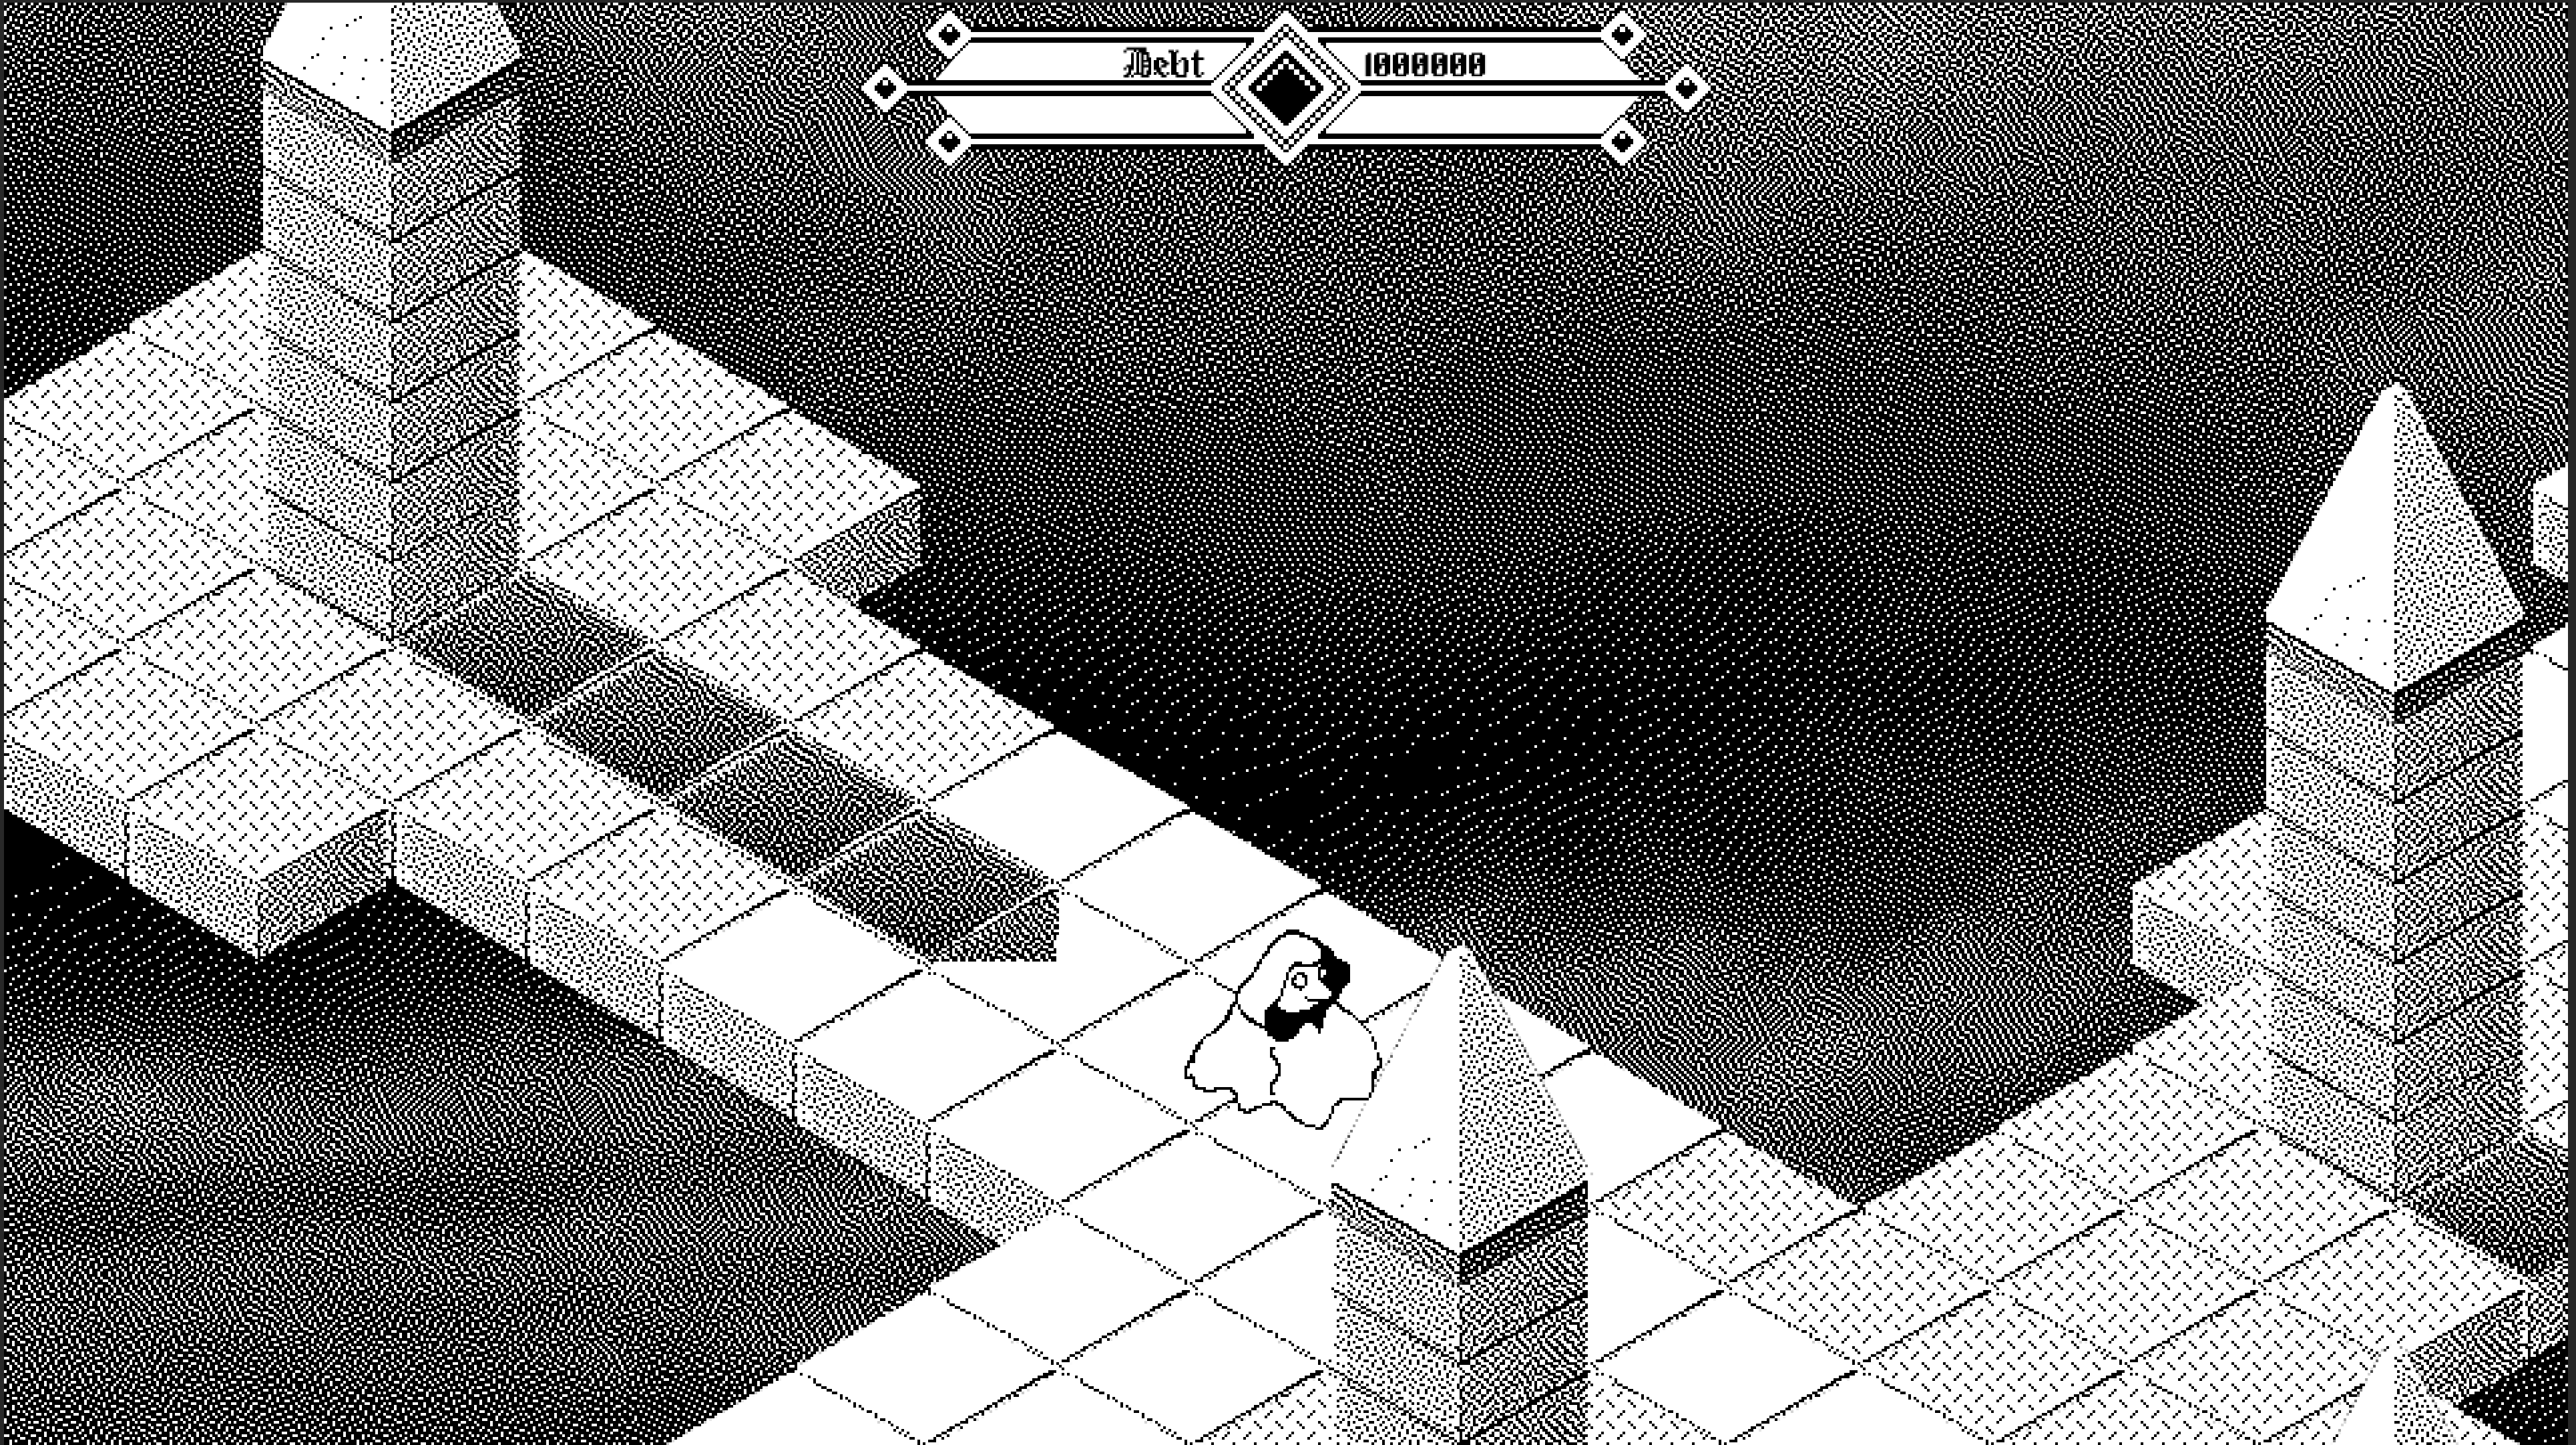 screenshot of obelisk game with patterns drawn on ground tiles